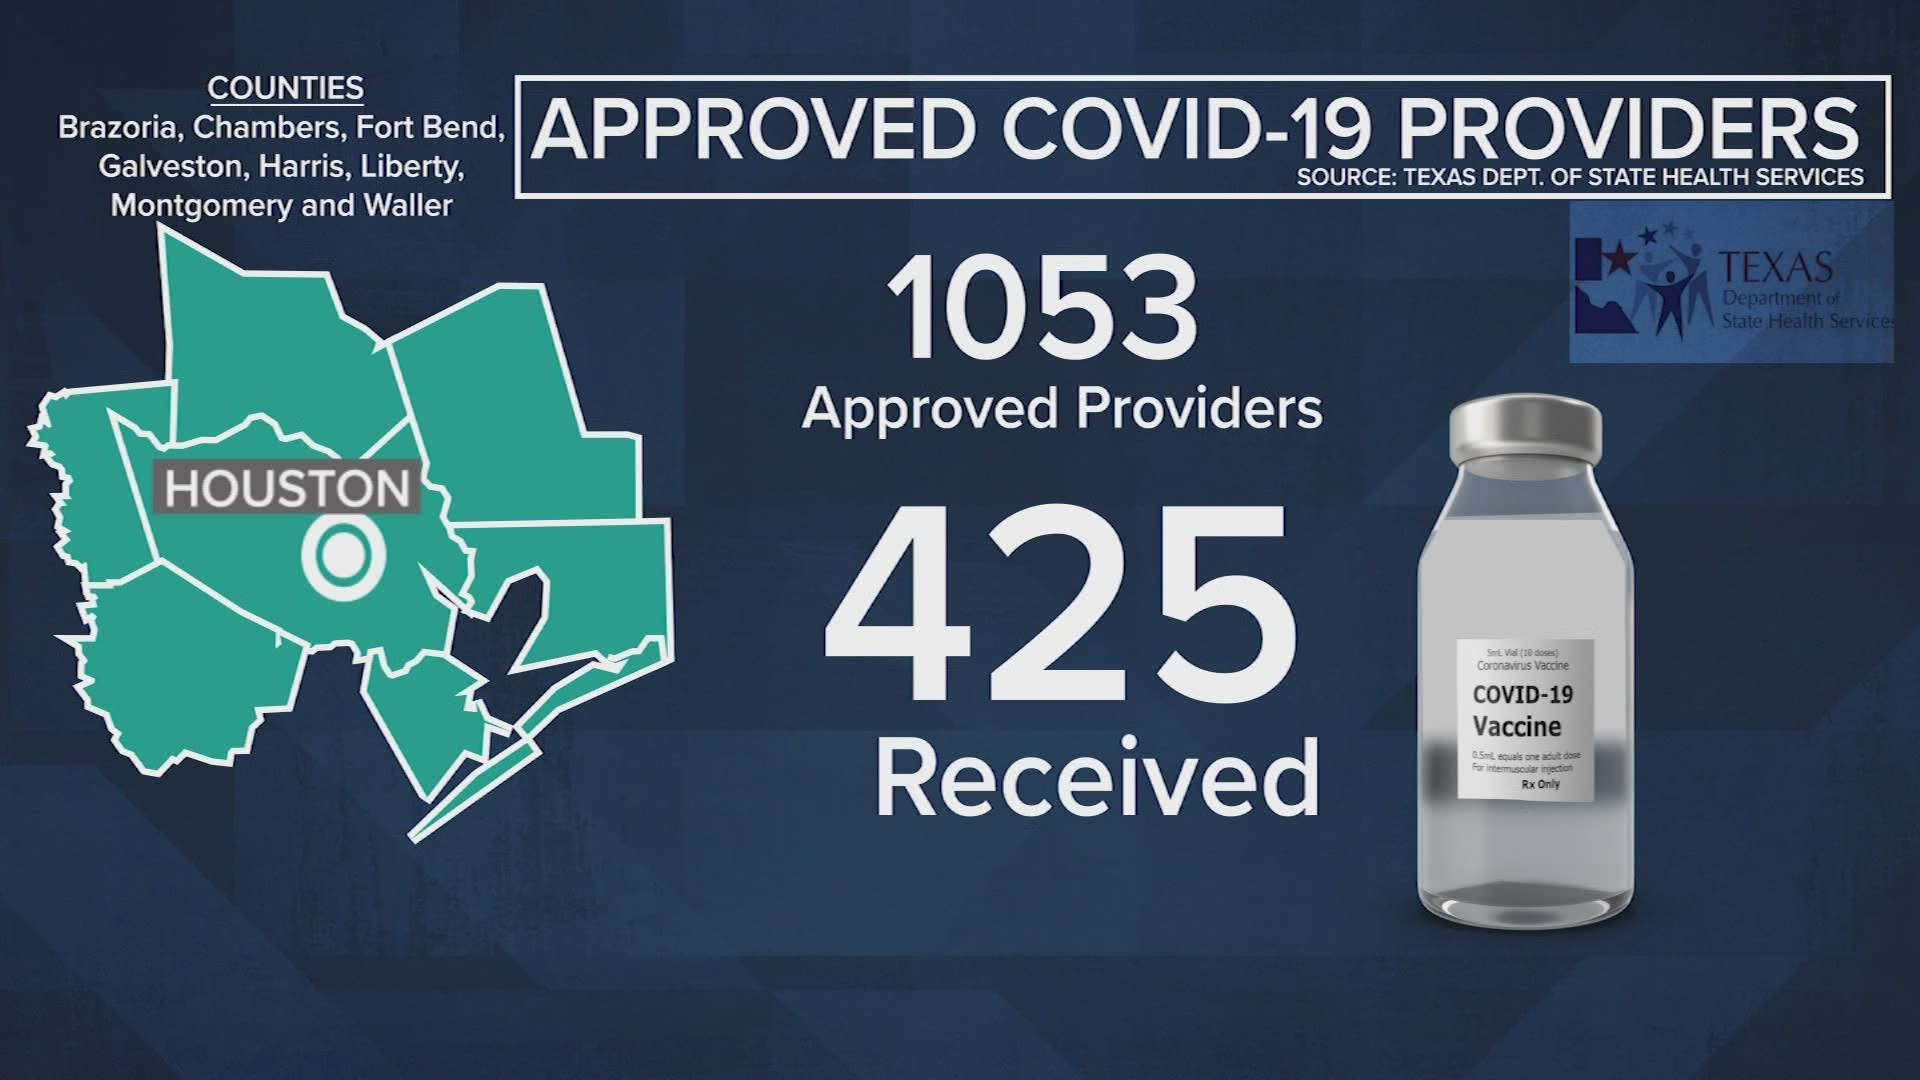 Less than half of Houston-area health care providers approved to distribute COVID-19 vaccines have received any doses, according to a KHOU 11 analysis of data from t